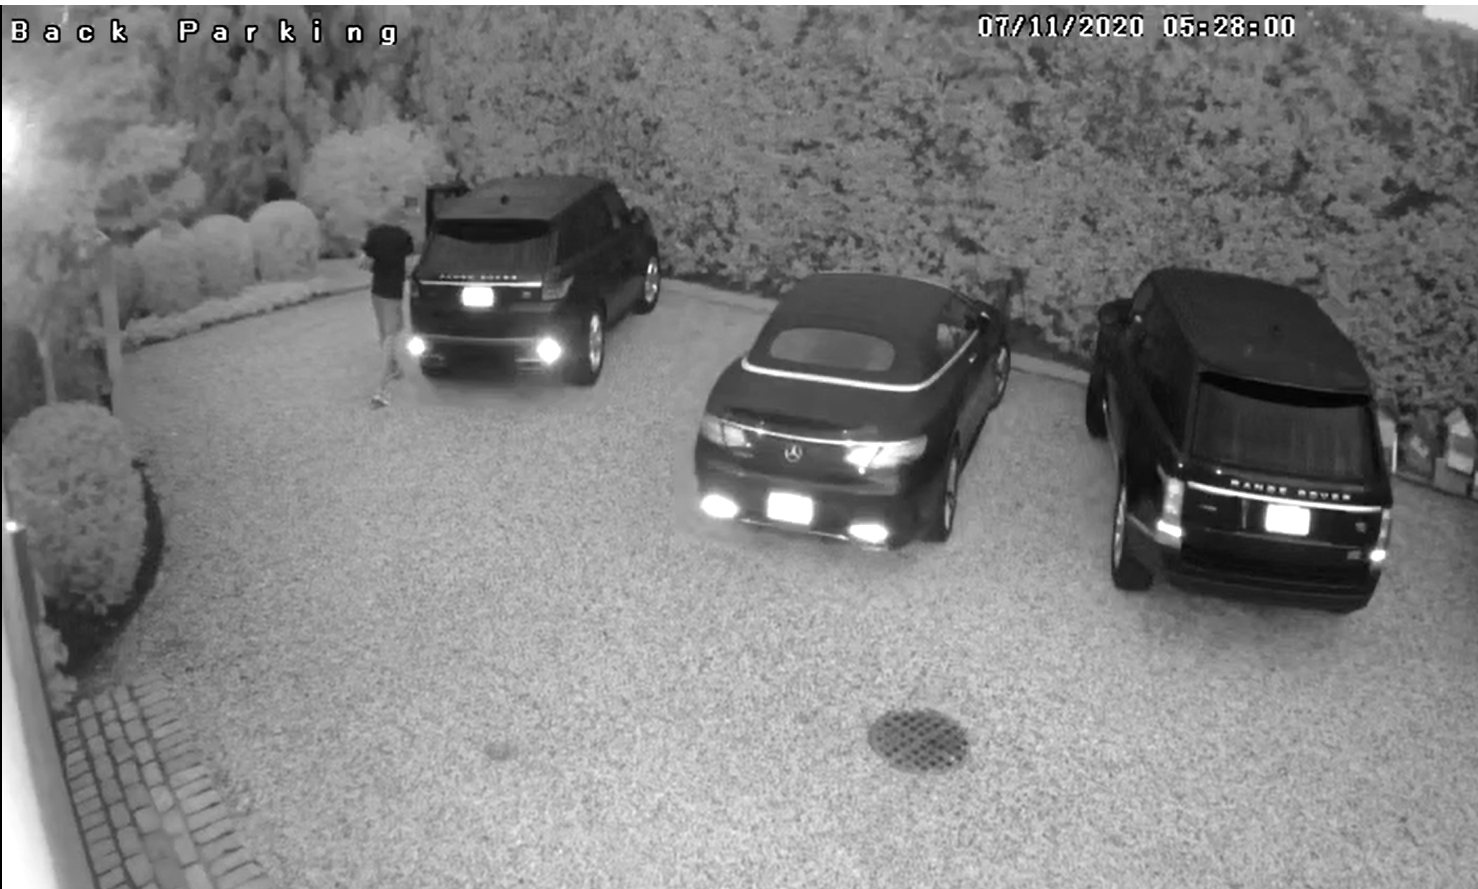 Easy access, with vehicles left unlocked  and key fobs left inside leave luxury cars ripe for the stealing, as seen in security video of a recent theft. COURTESY SOUTHAMPTON TOWN POLICE